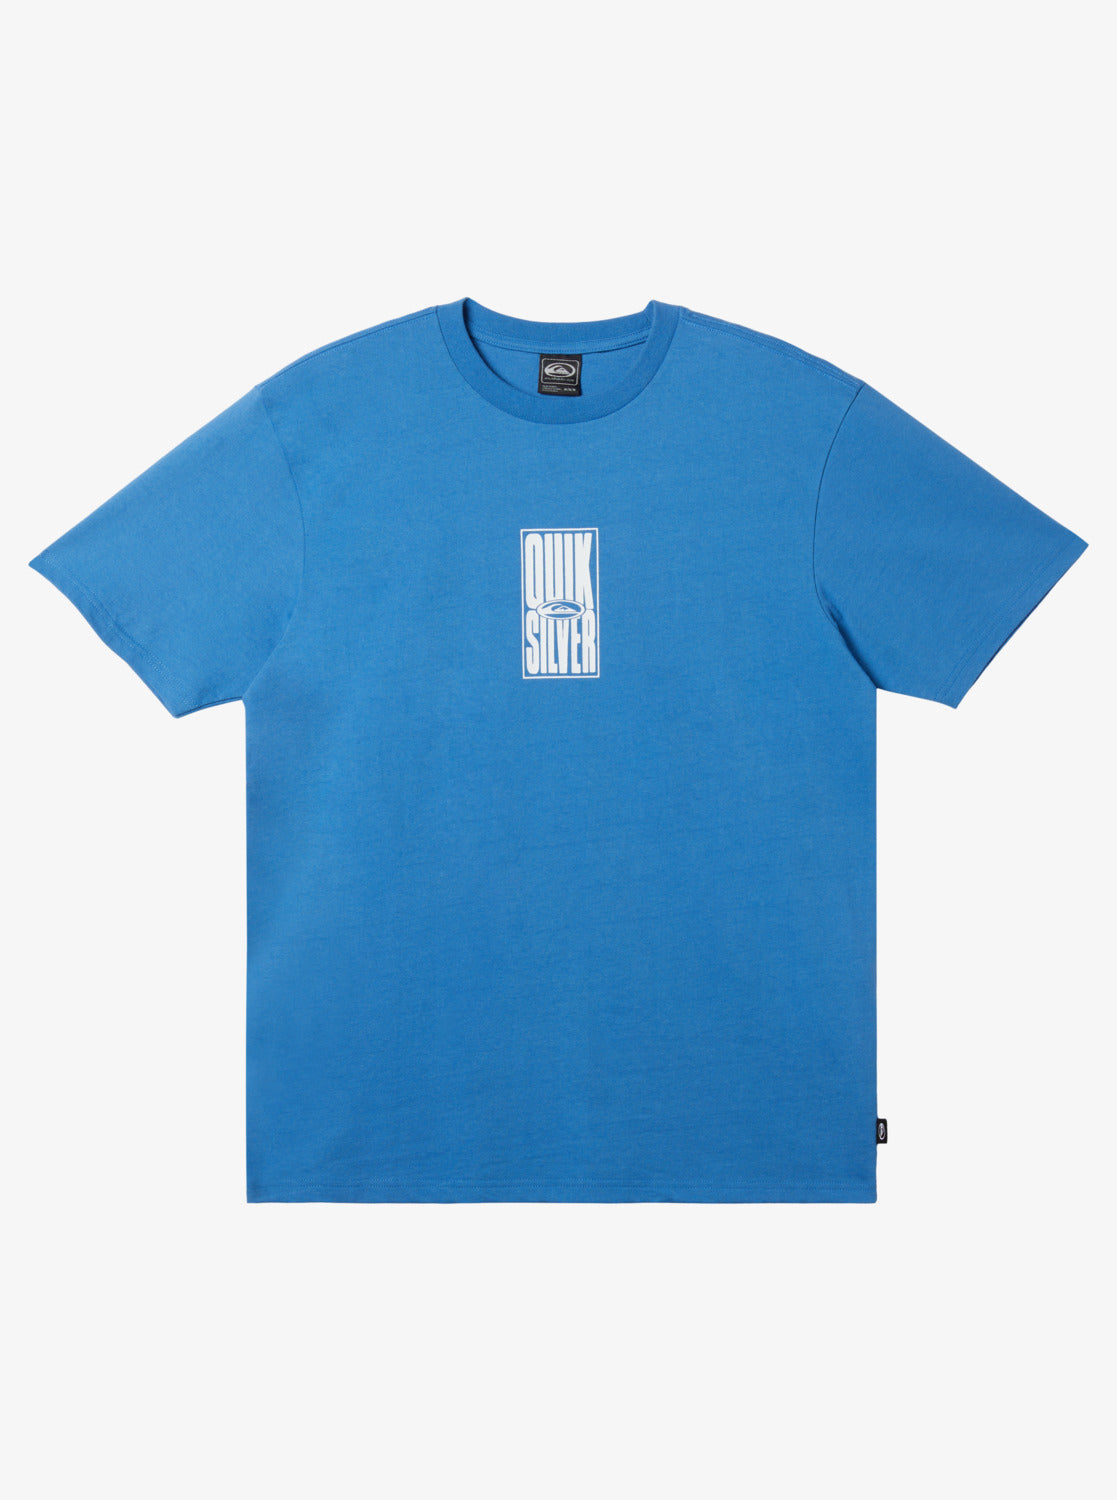 Quiksilver Tall Stack Tee - Star Sapphire - Star Surf + Skate